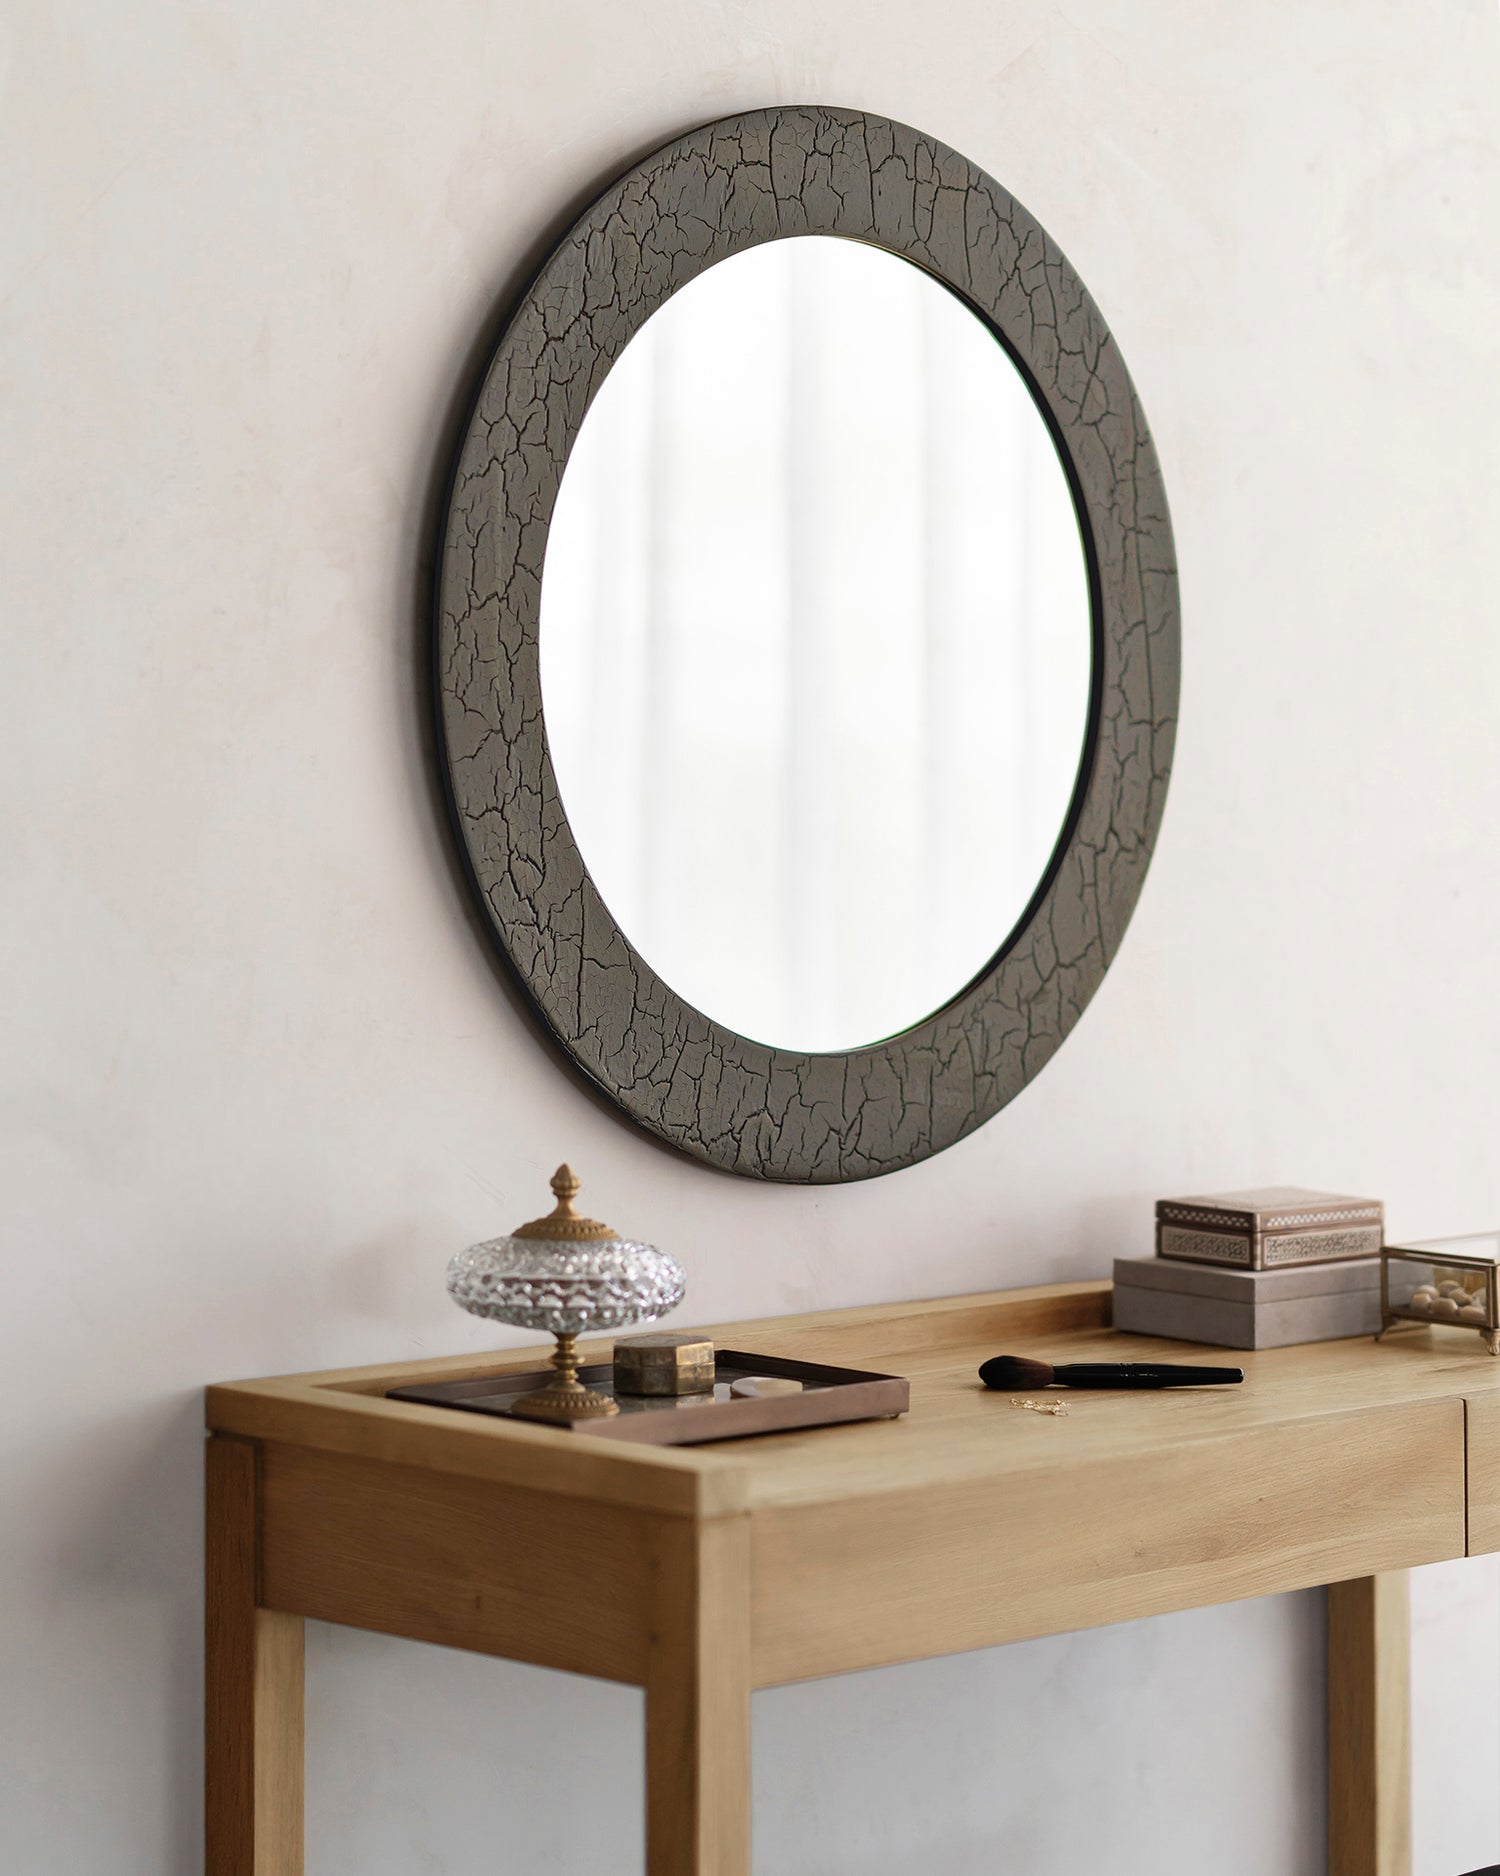 The Frame Desk from Ethnicraft with a mirror above